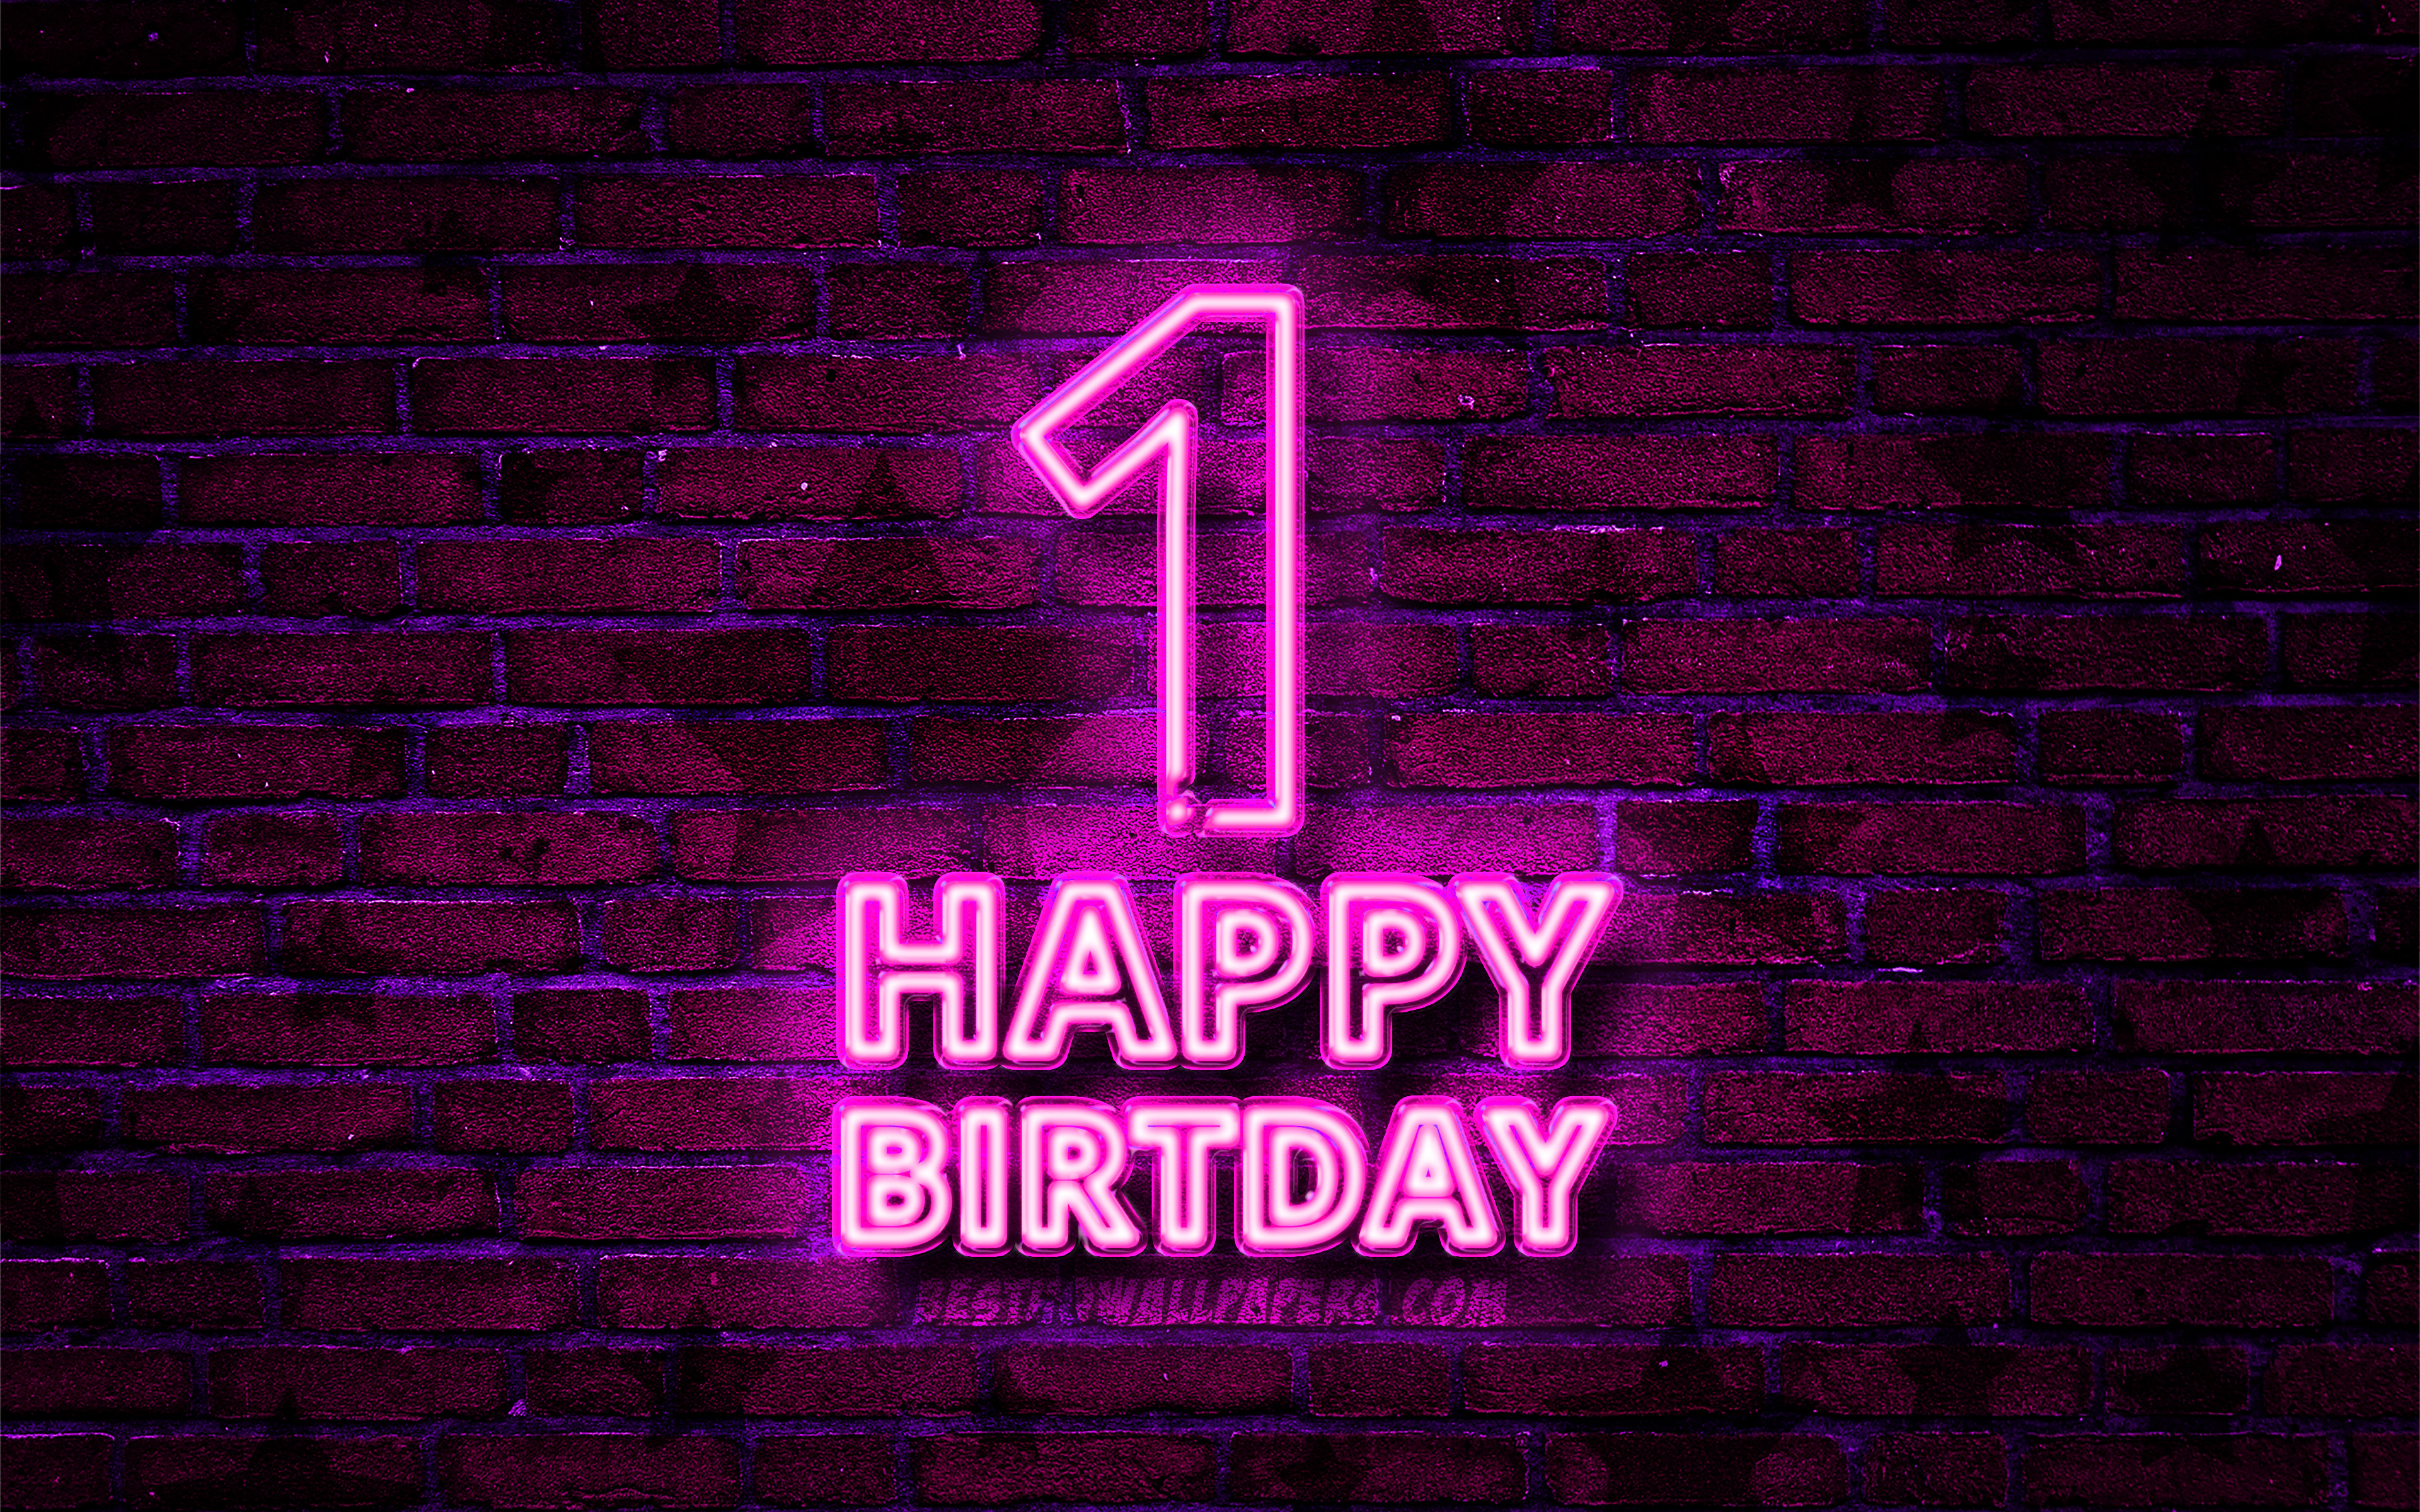 Download wallpaper Happy 1 Years Birthday, 4k, purple neon text, 1st Birthday Party, purple brickwall, Happy 1st birthday, Birthday concept, Birthday Party, 1st Birthday for desktop with resolution 3840x2400. High Quality HD